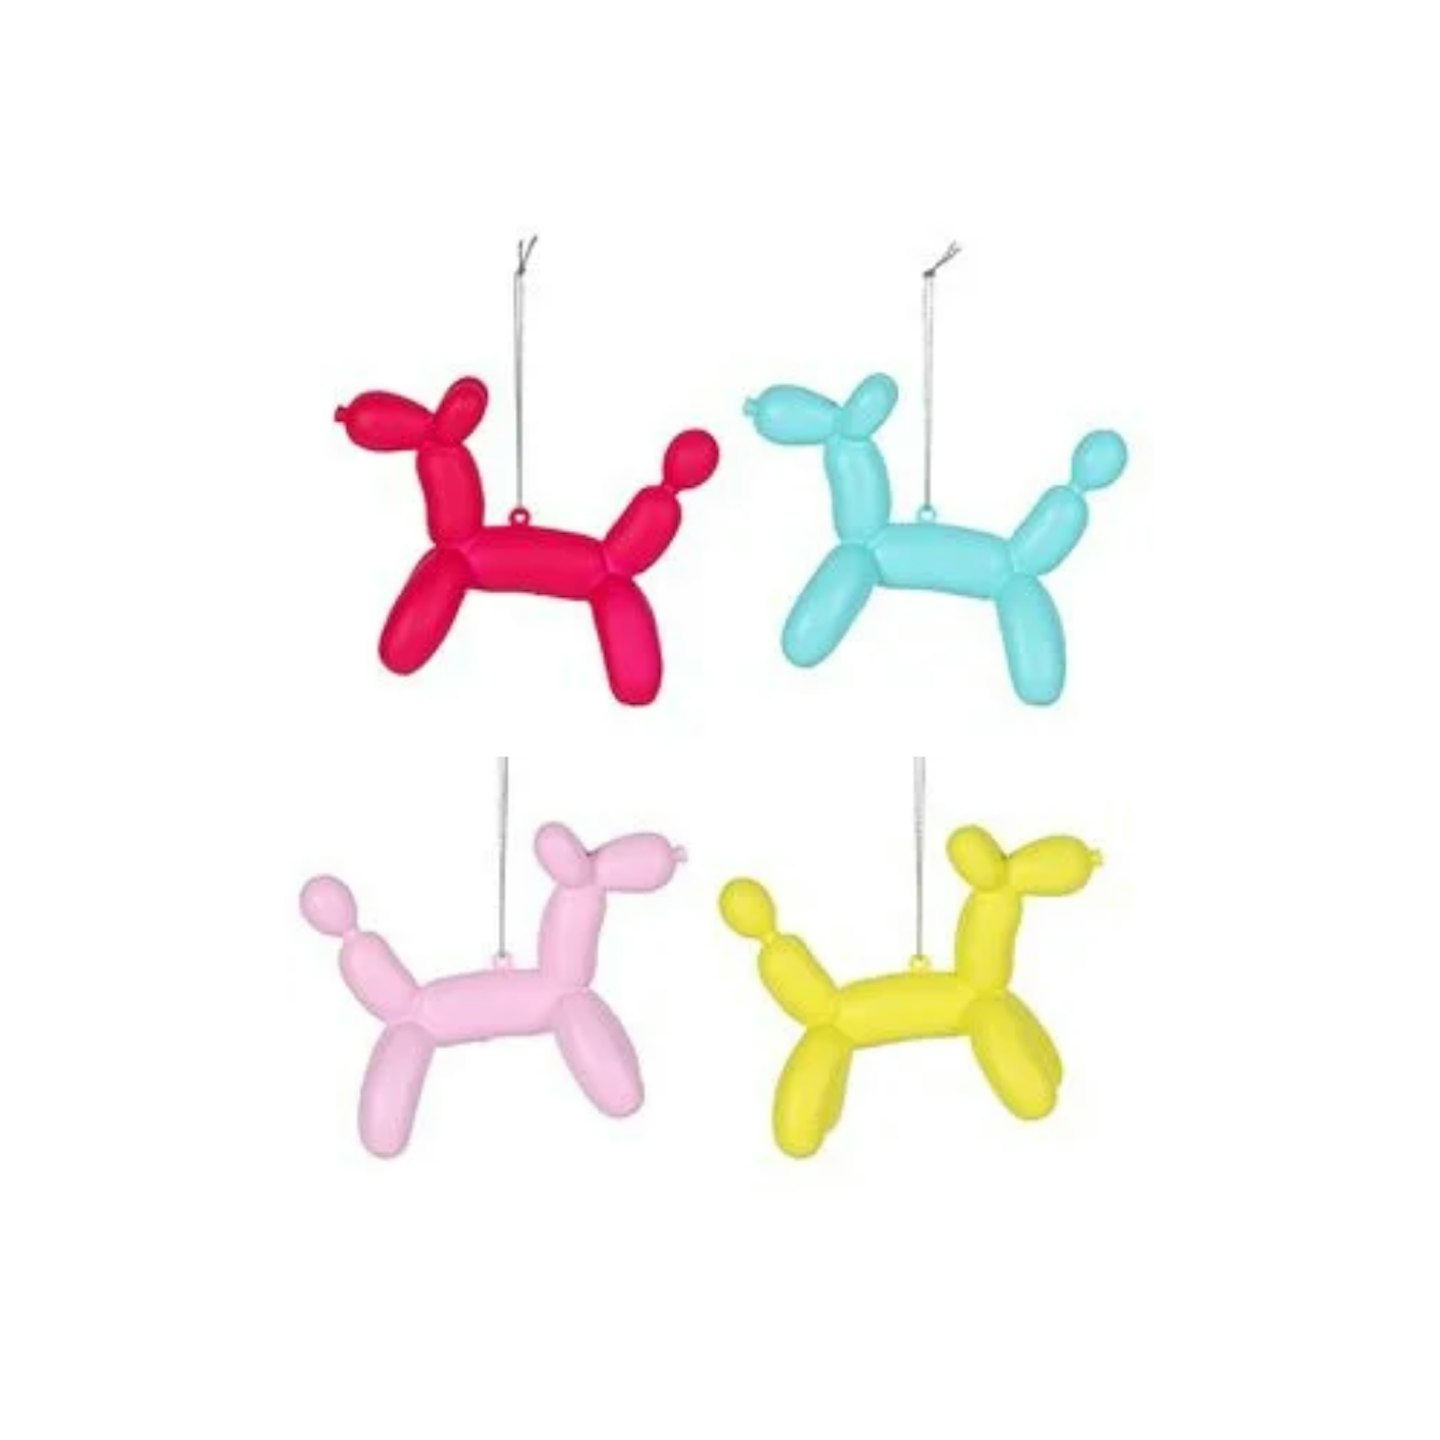 Balloon Dog Christmas Decorations - pack of 4